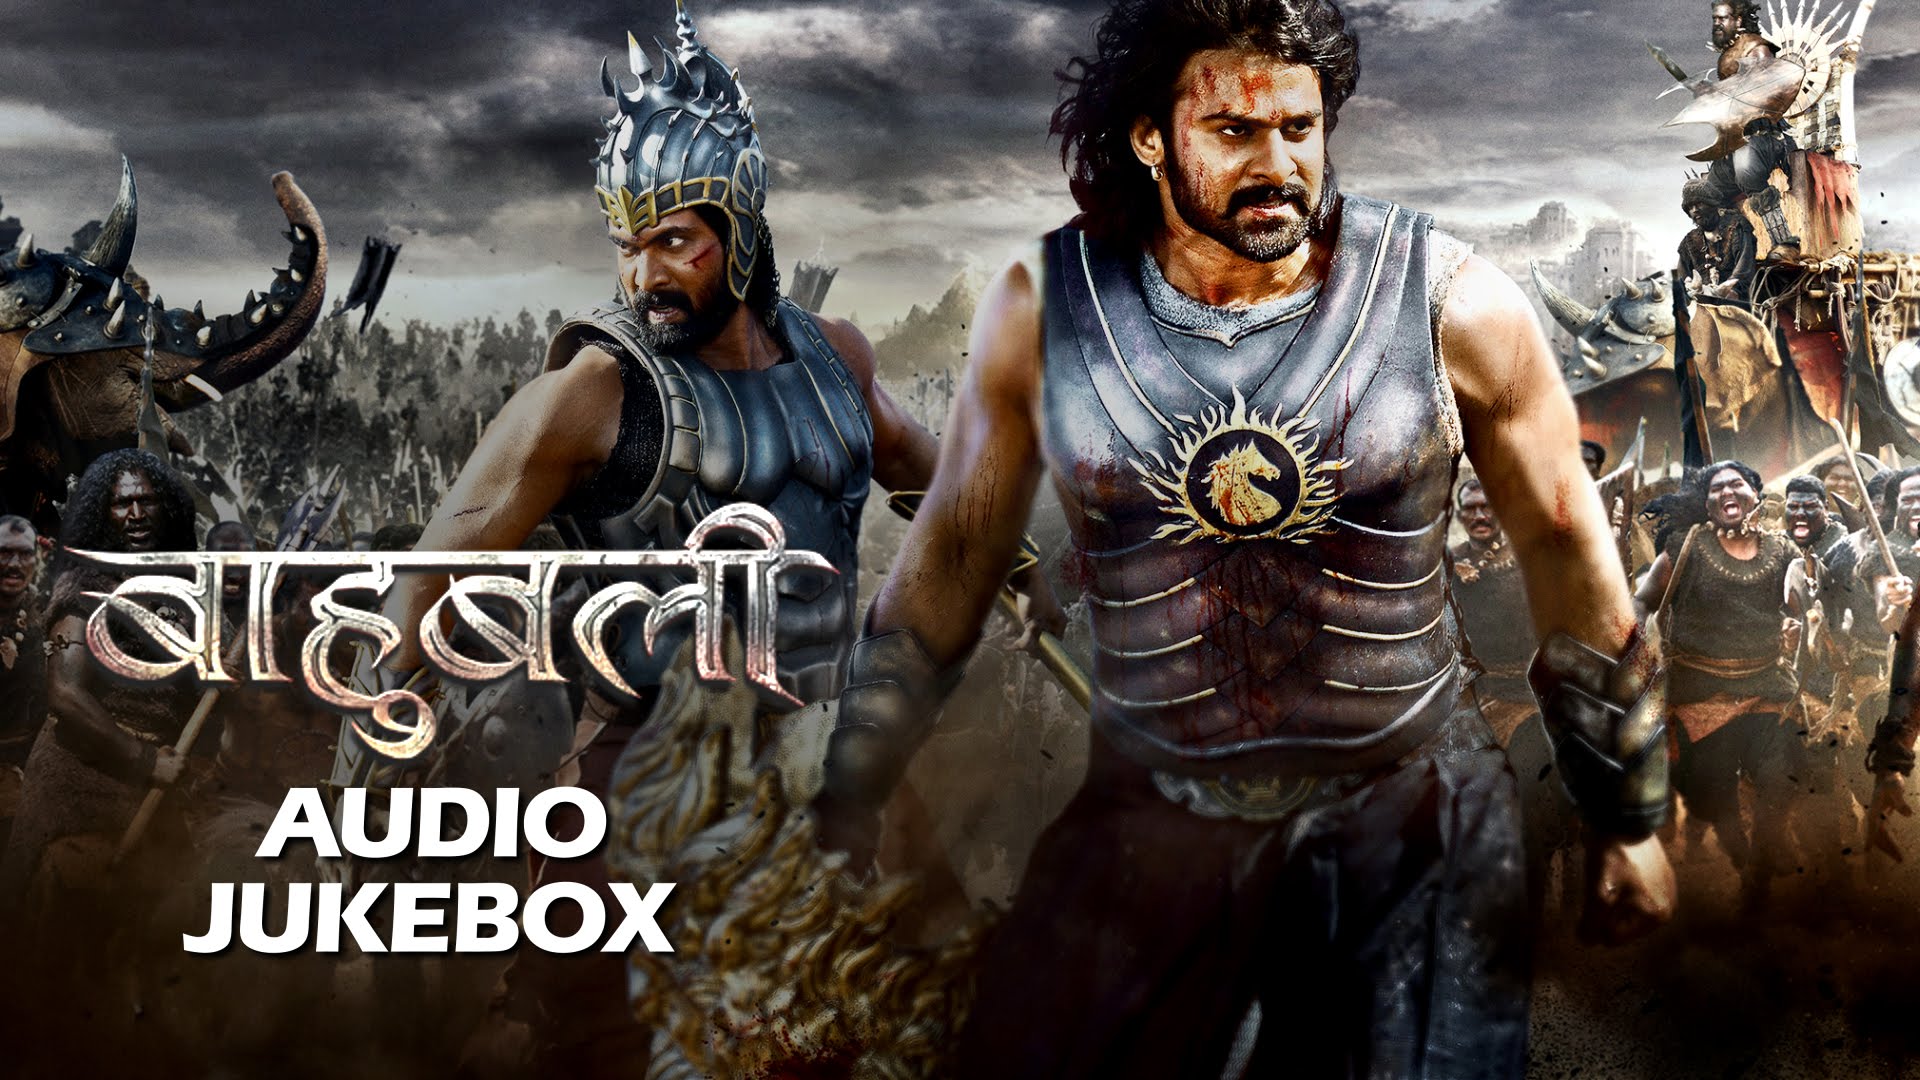 Baahubali: The Beginning Pics, Movie Collection